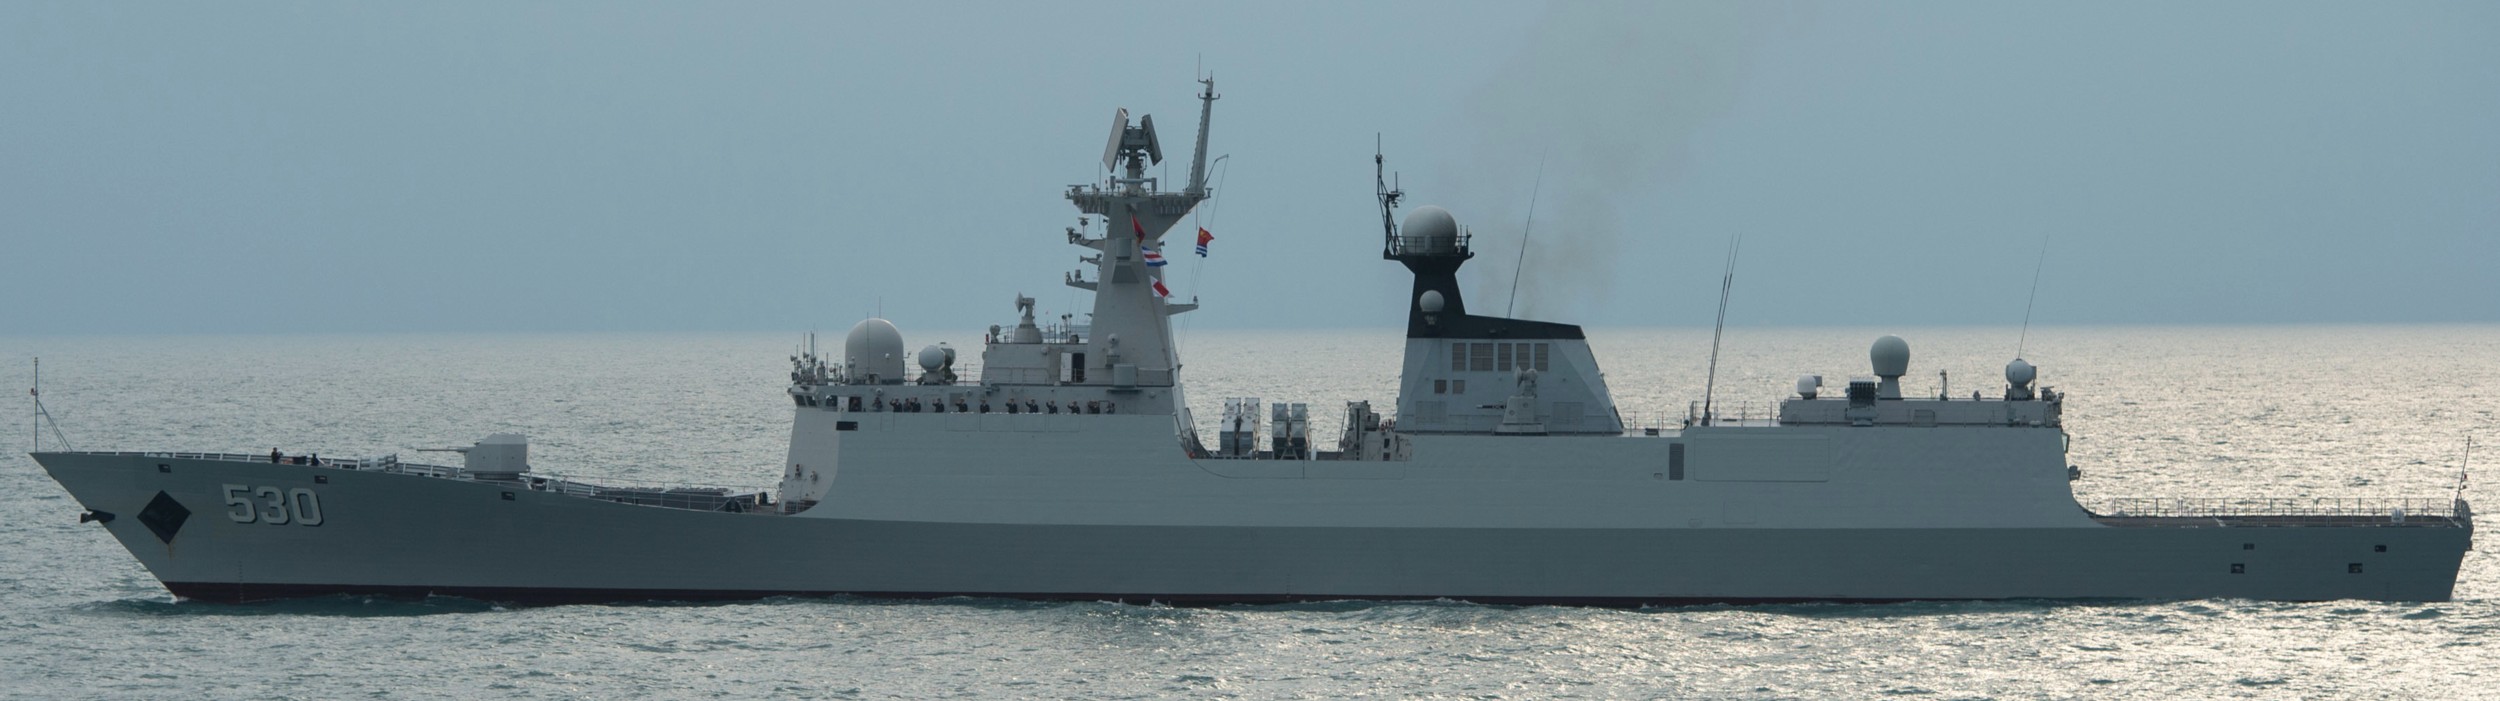 ffg-530 plans xuzhou type 054a jiangkai ii class guided missile frigate china people's liberation army navy 04